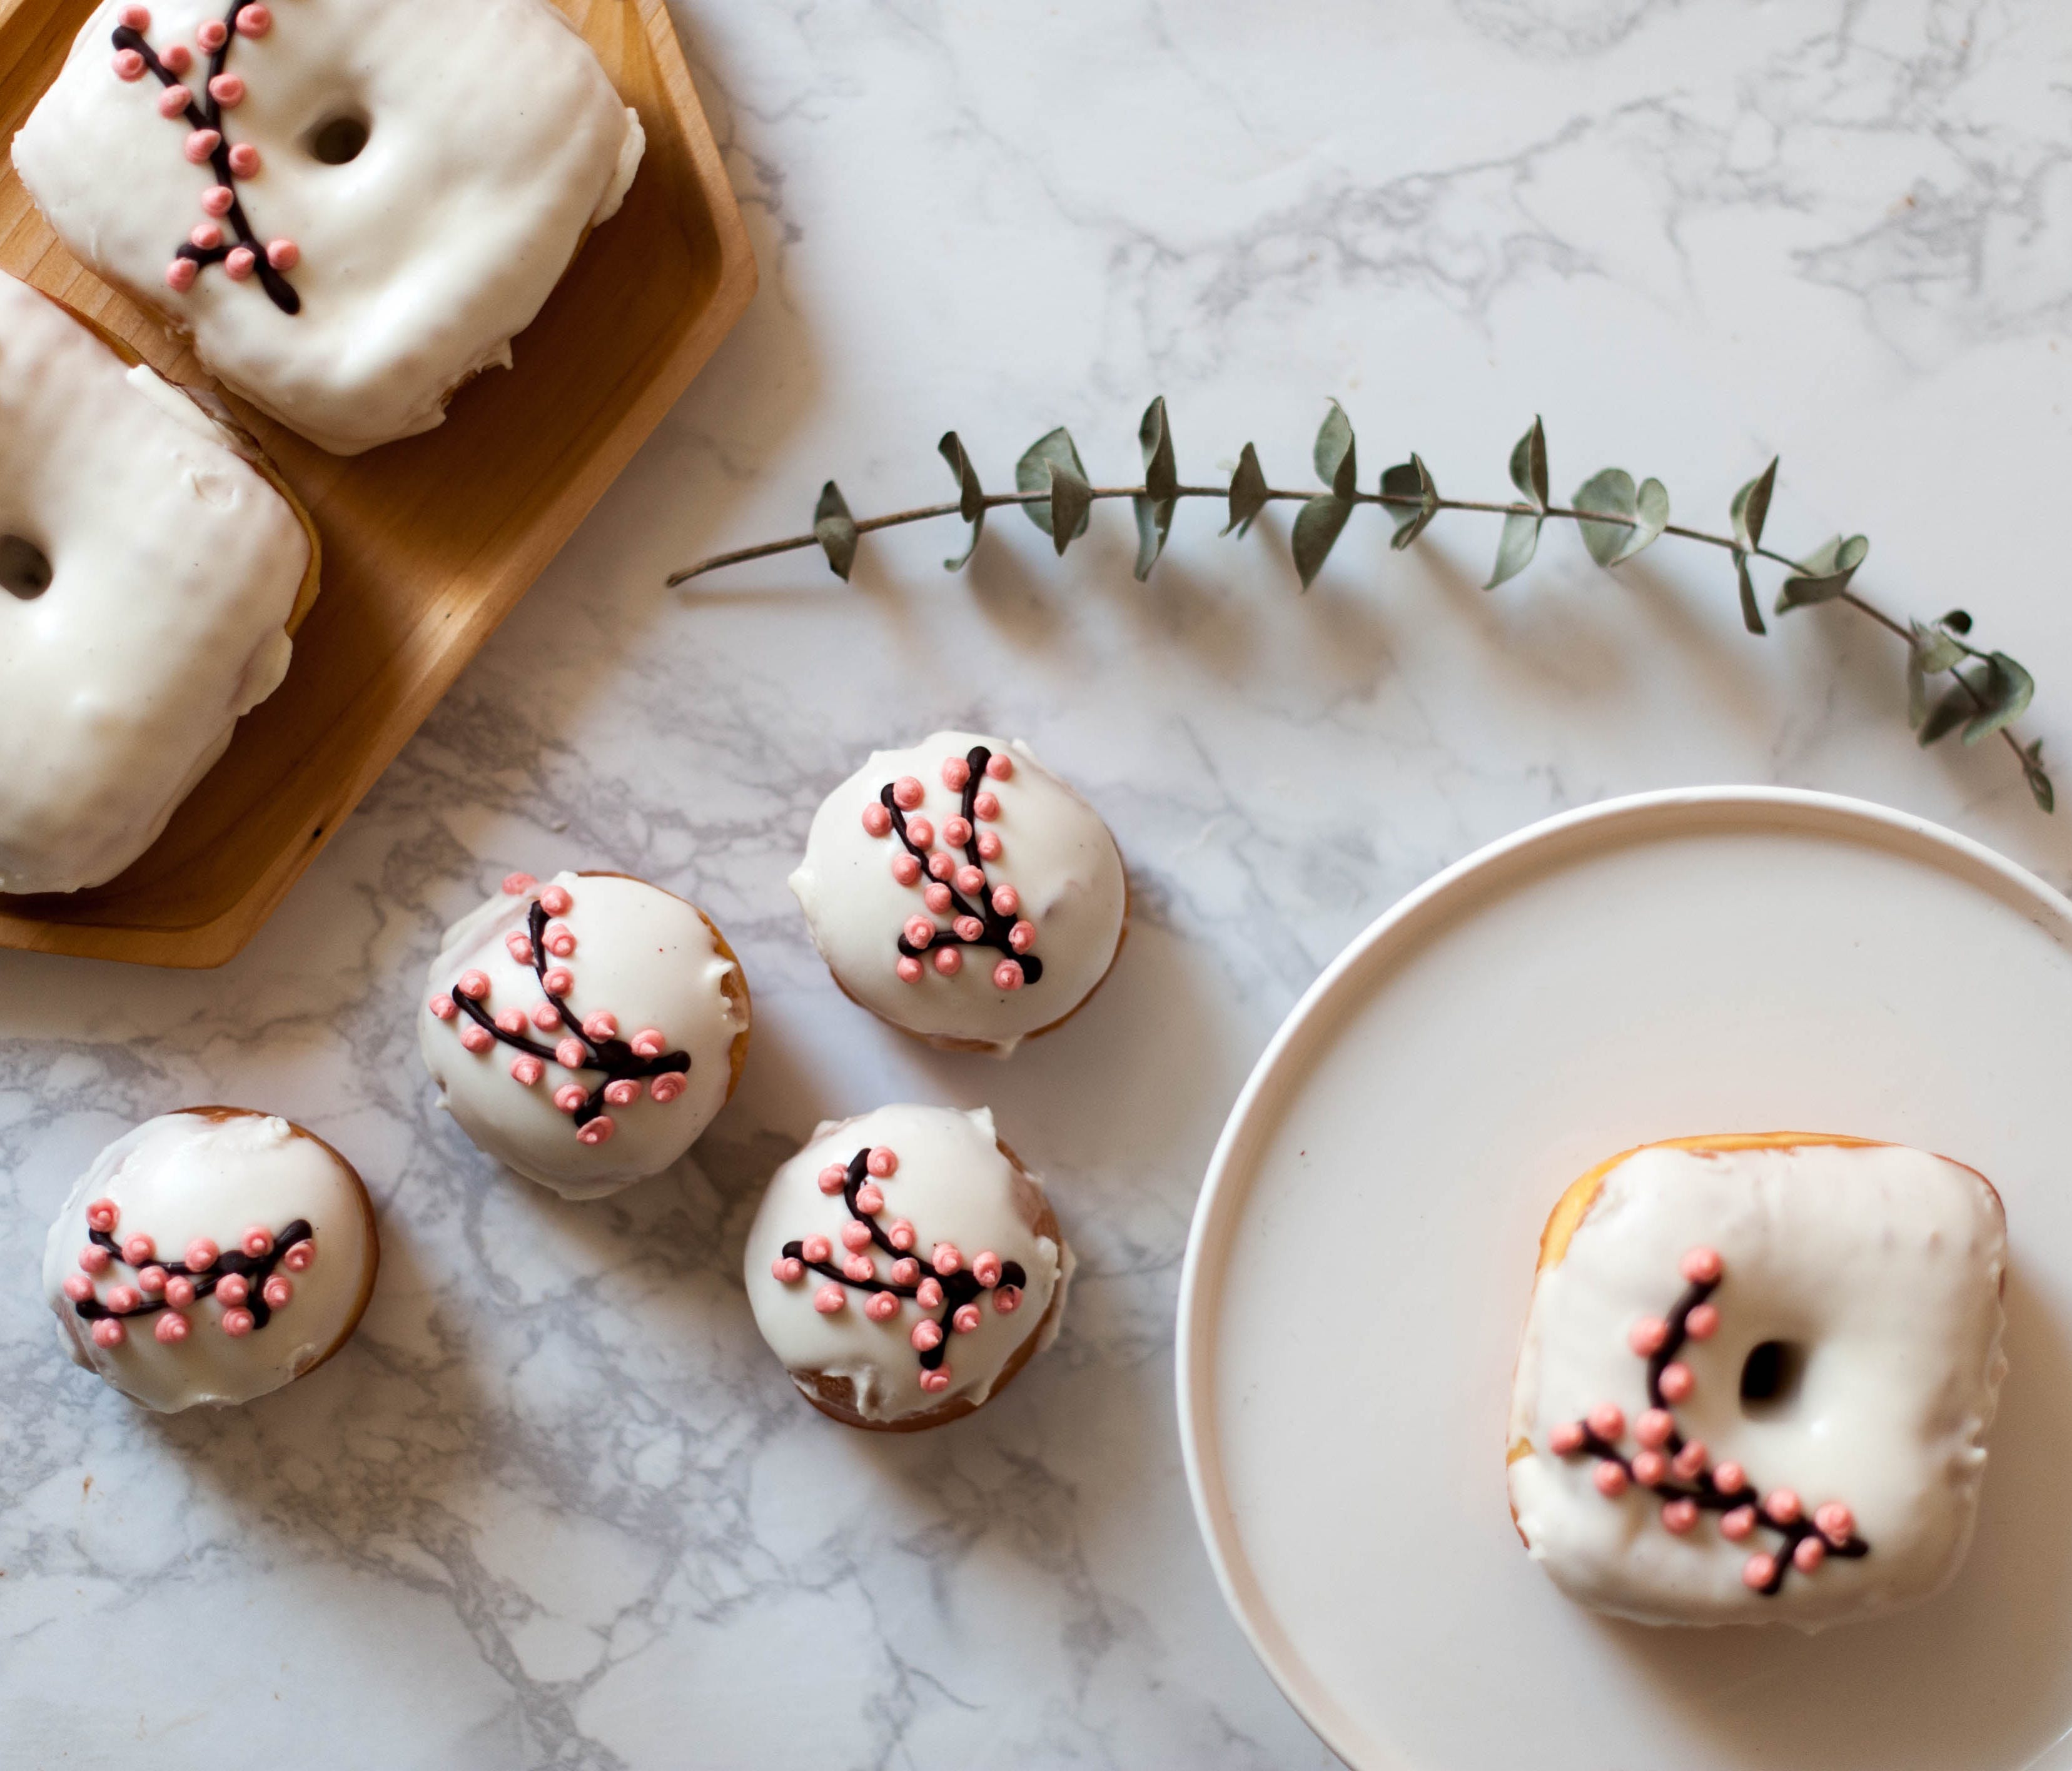 In Washington, D.C. and Falls Church, Va., Astro Doughnuts & Fried Chicken is offering Cherry Blossom doughnuts with cherry jam filling, cream cheese glaze and a cherry blossom design combining dark chocolate and cherry butter cream throughout March.